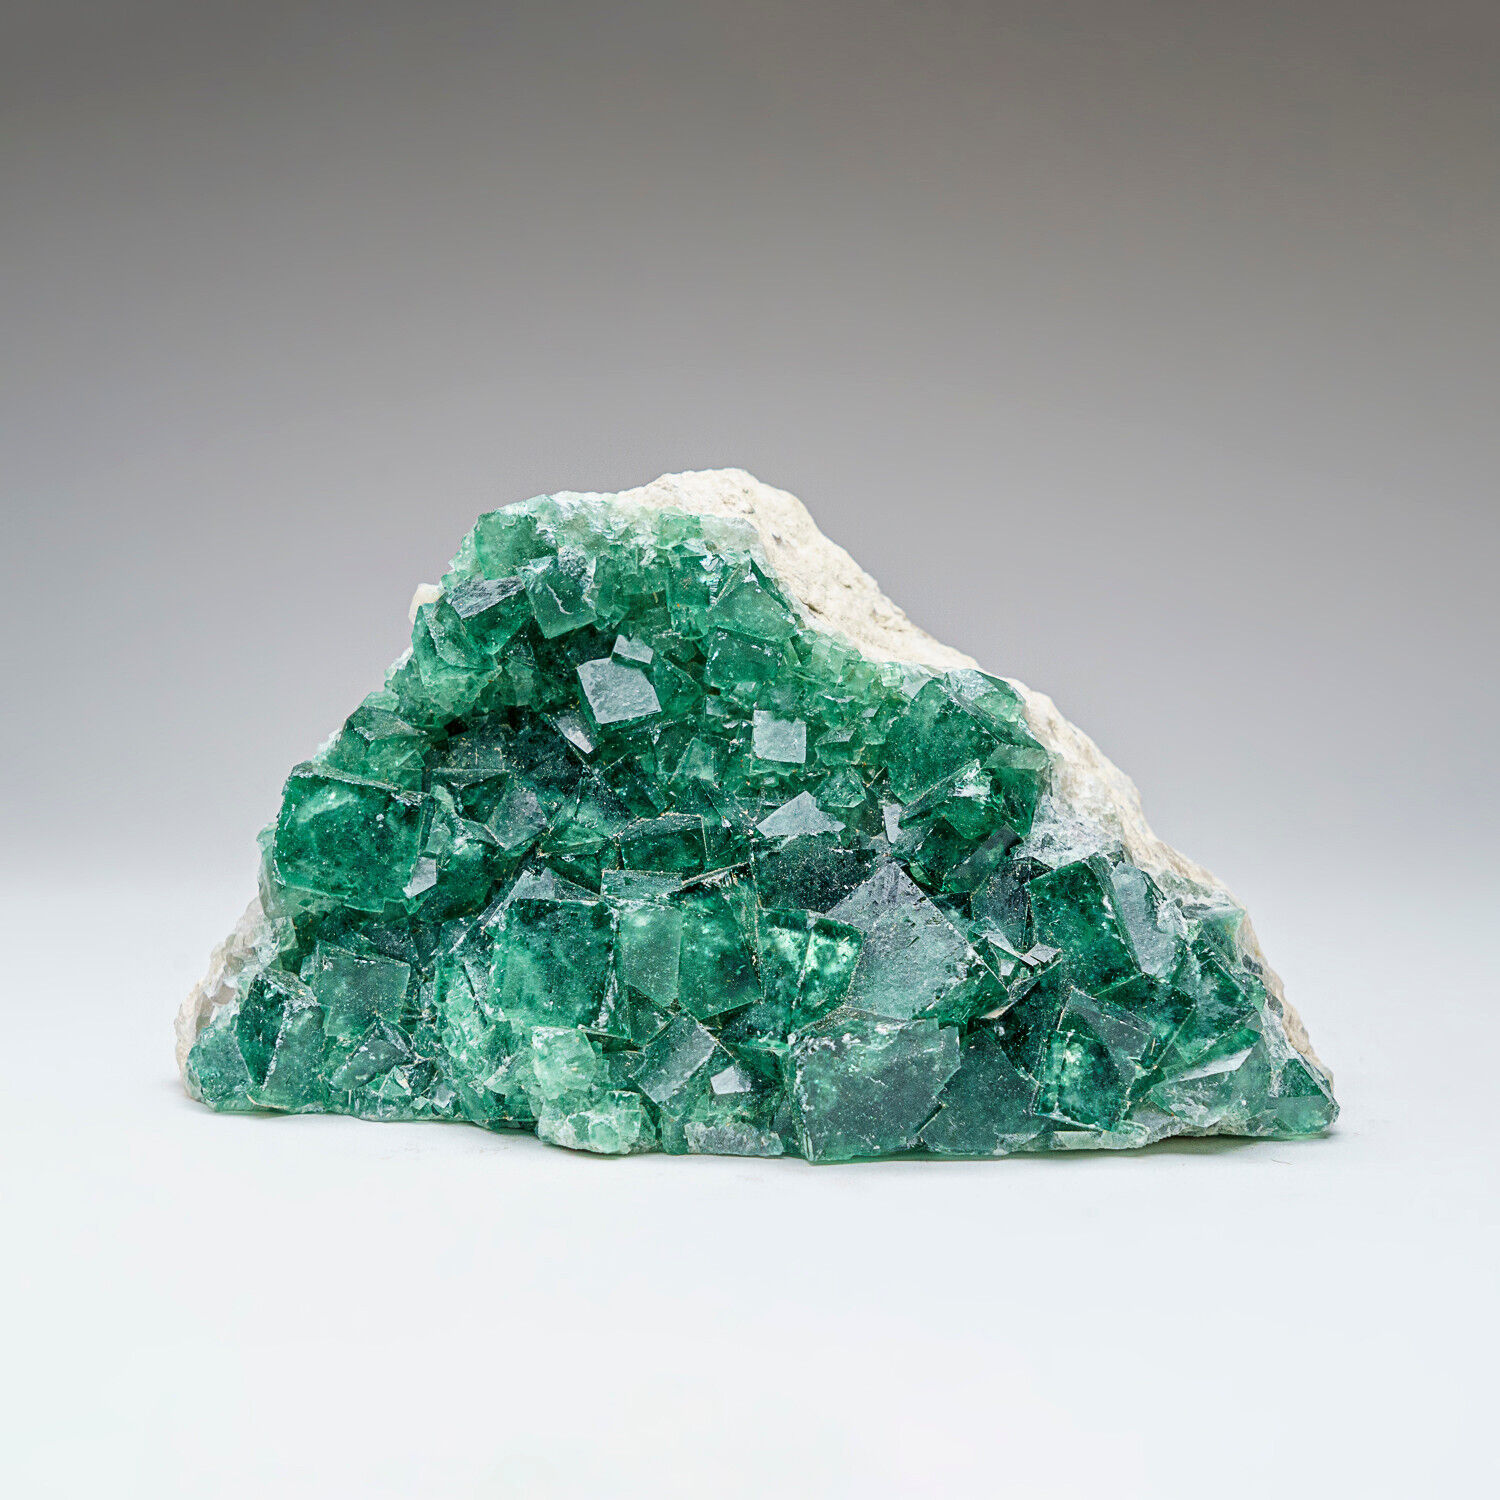 Genuine Green Fluorite from Namibia (1.9 lbs)